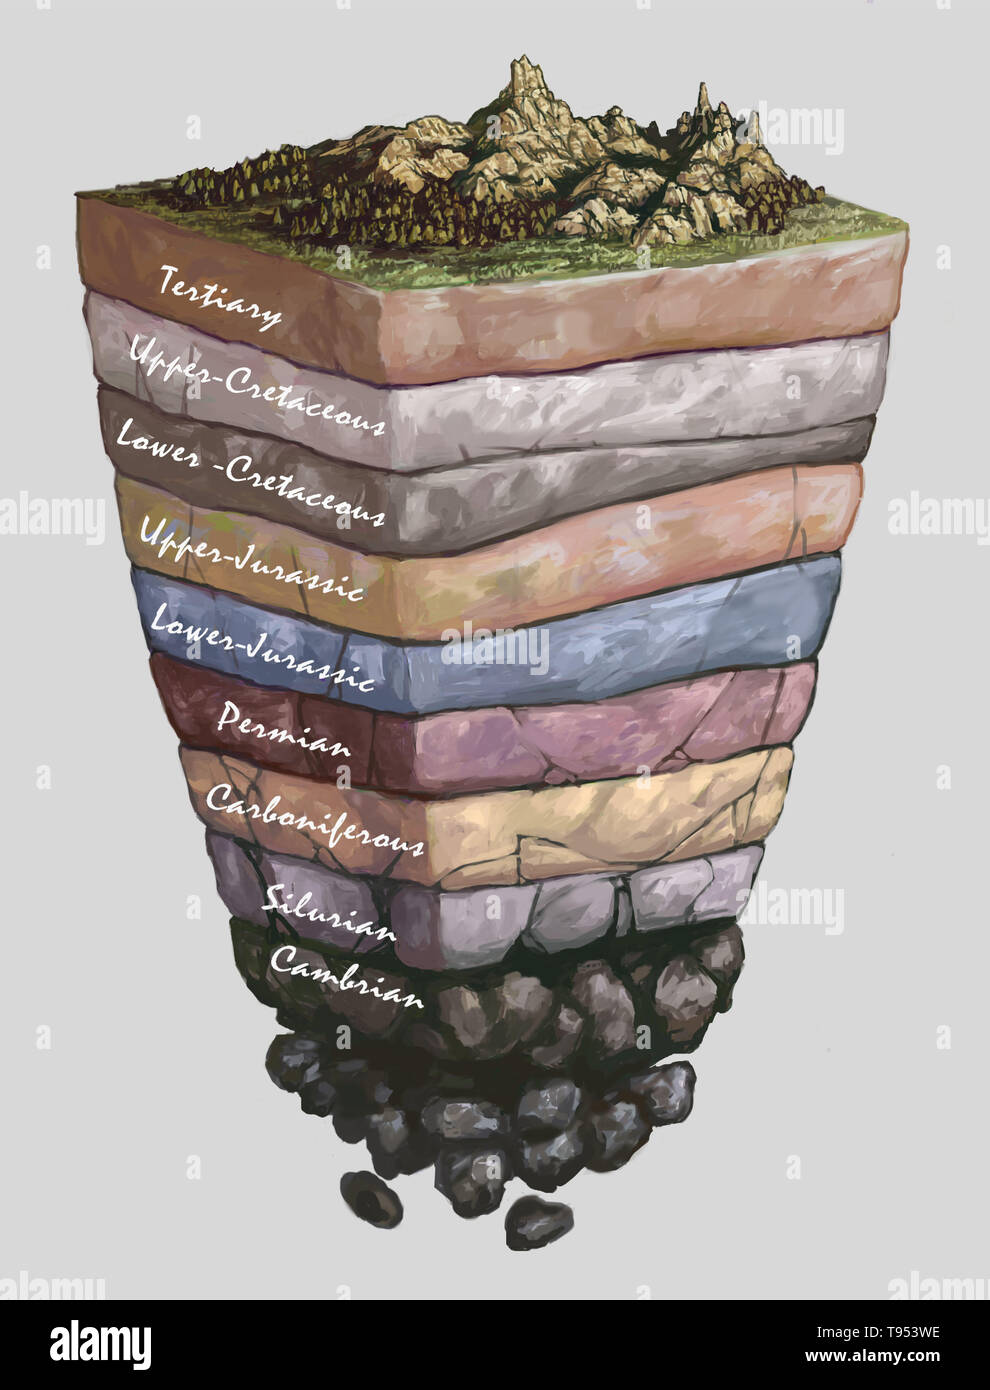 Geologic Time Scale Rock Layers